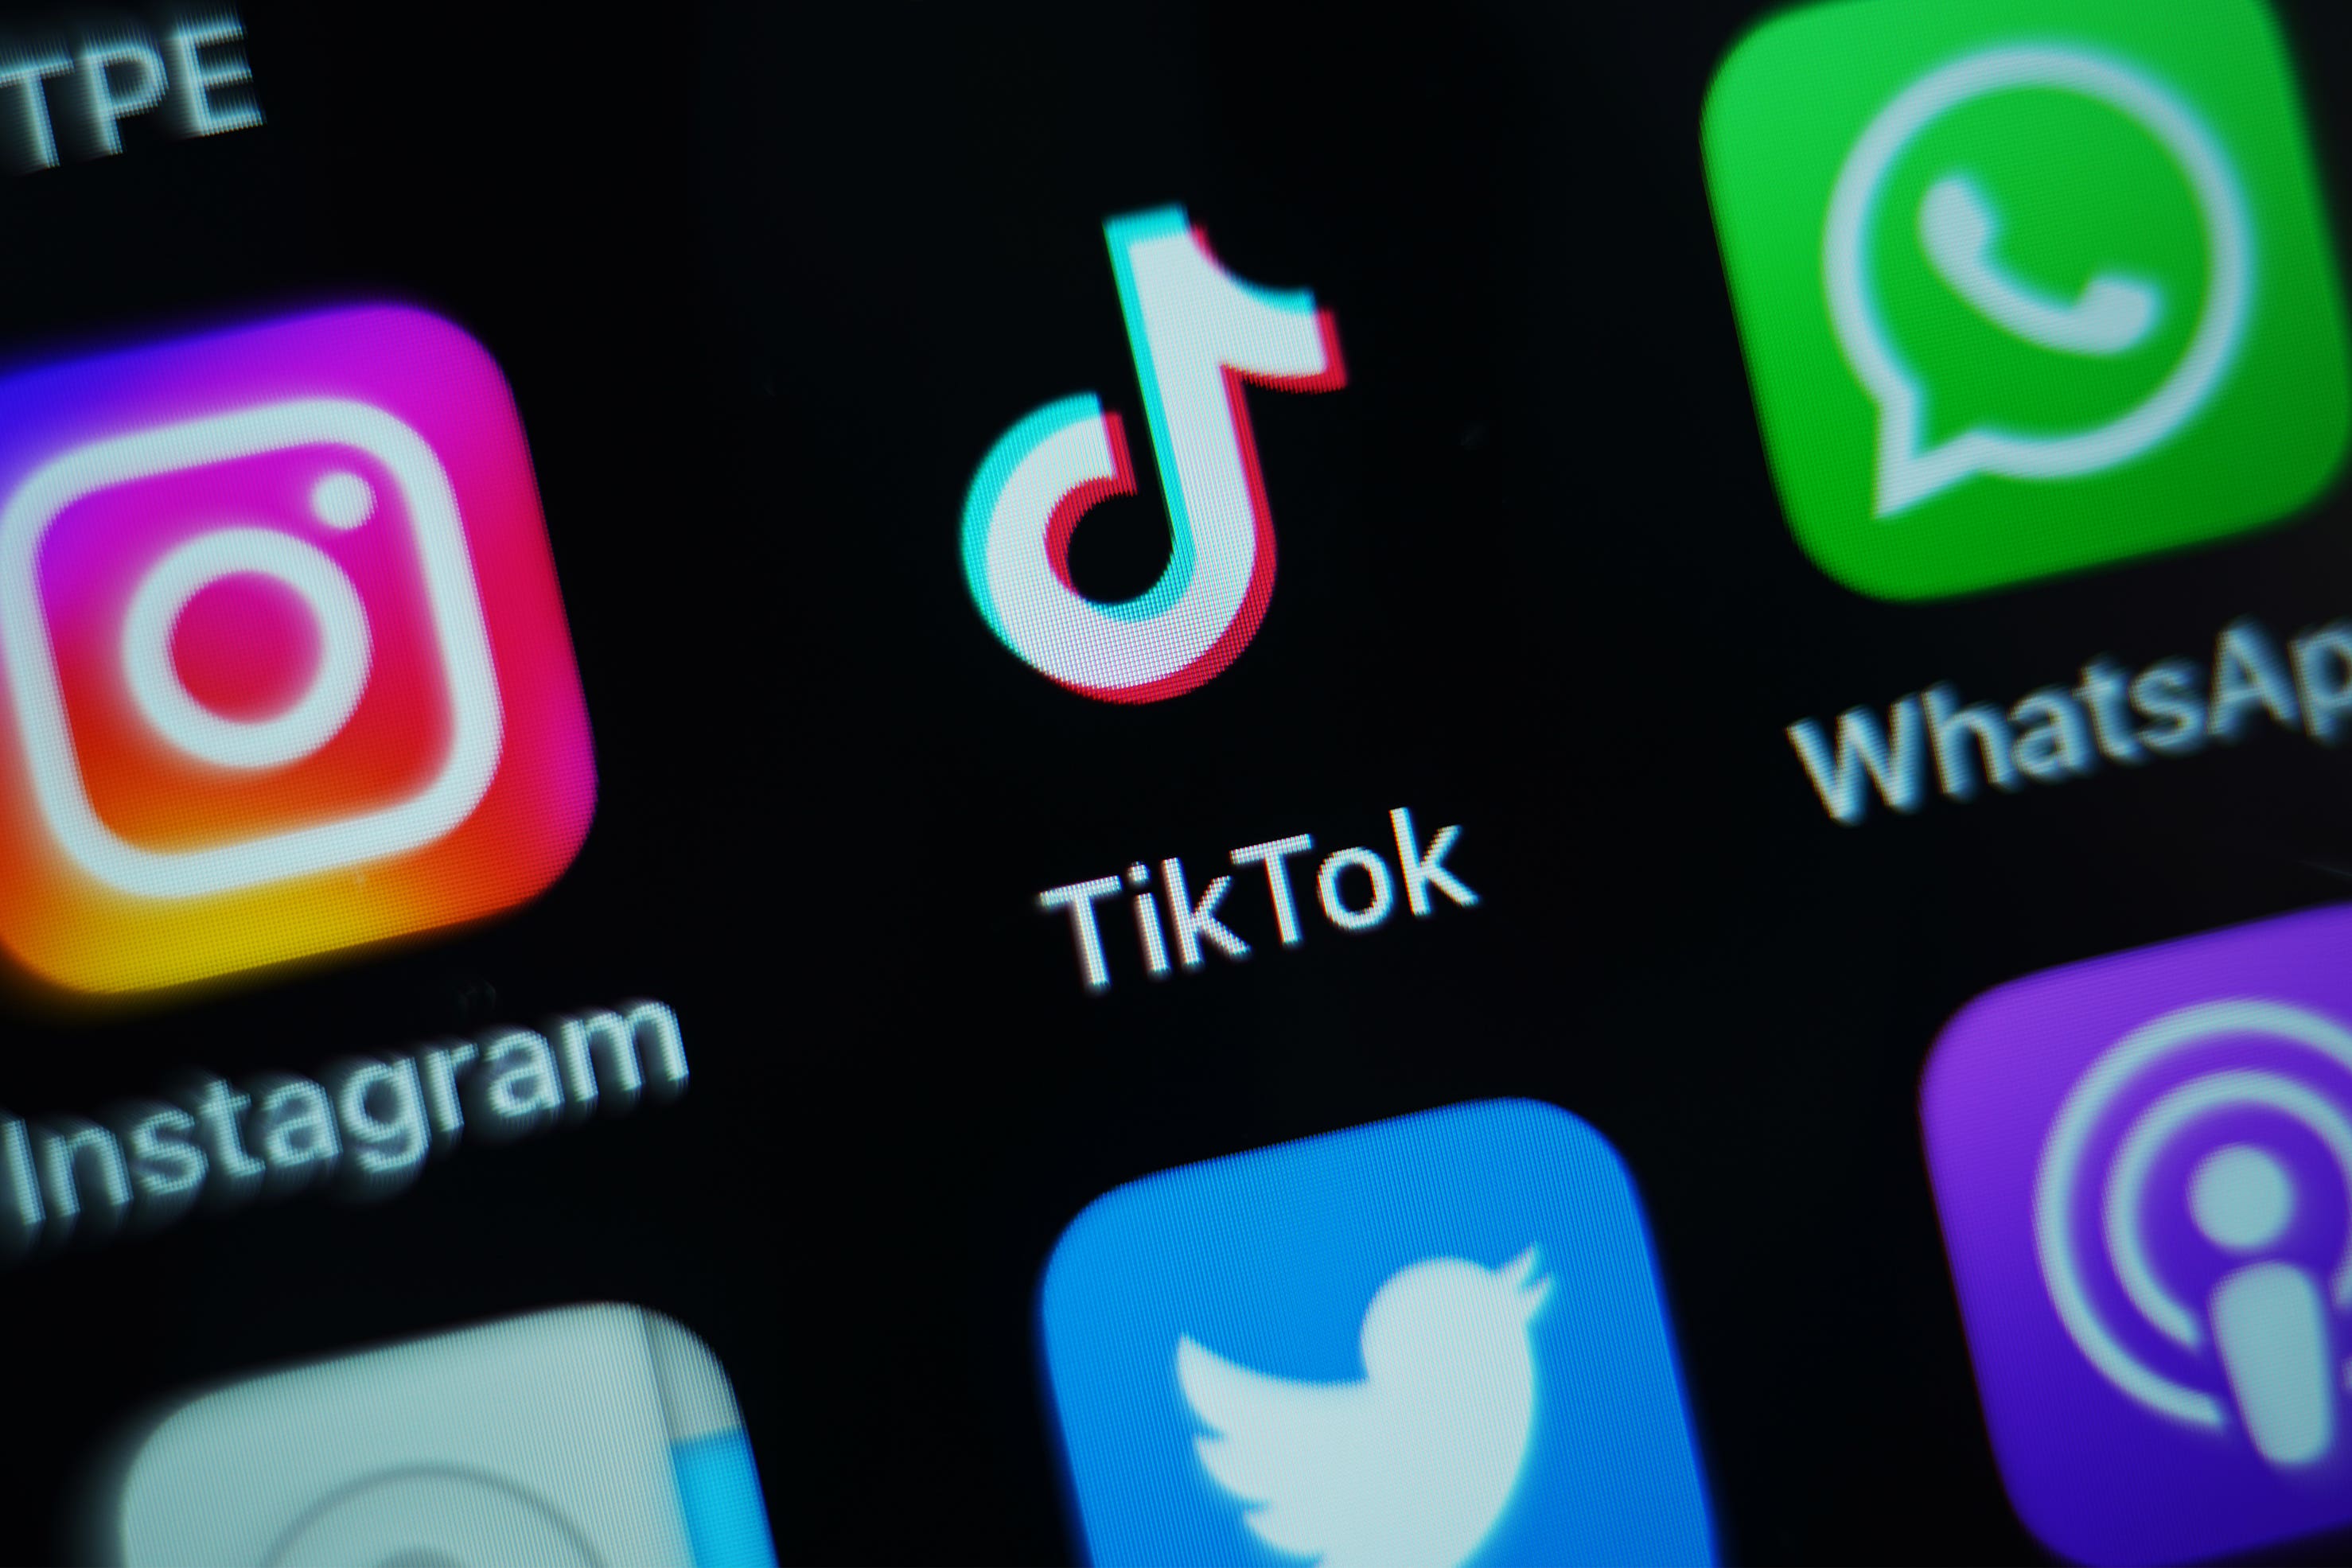 will the viral success of the ‘who tf did i marry’ tiktok saga usher in a new age of social media?